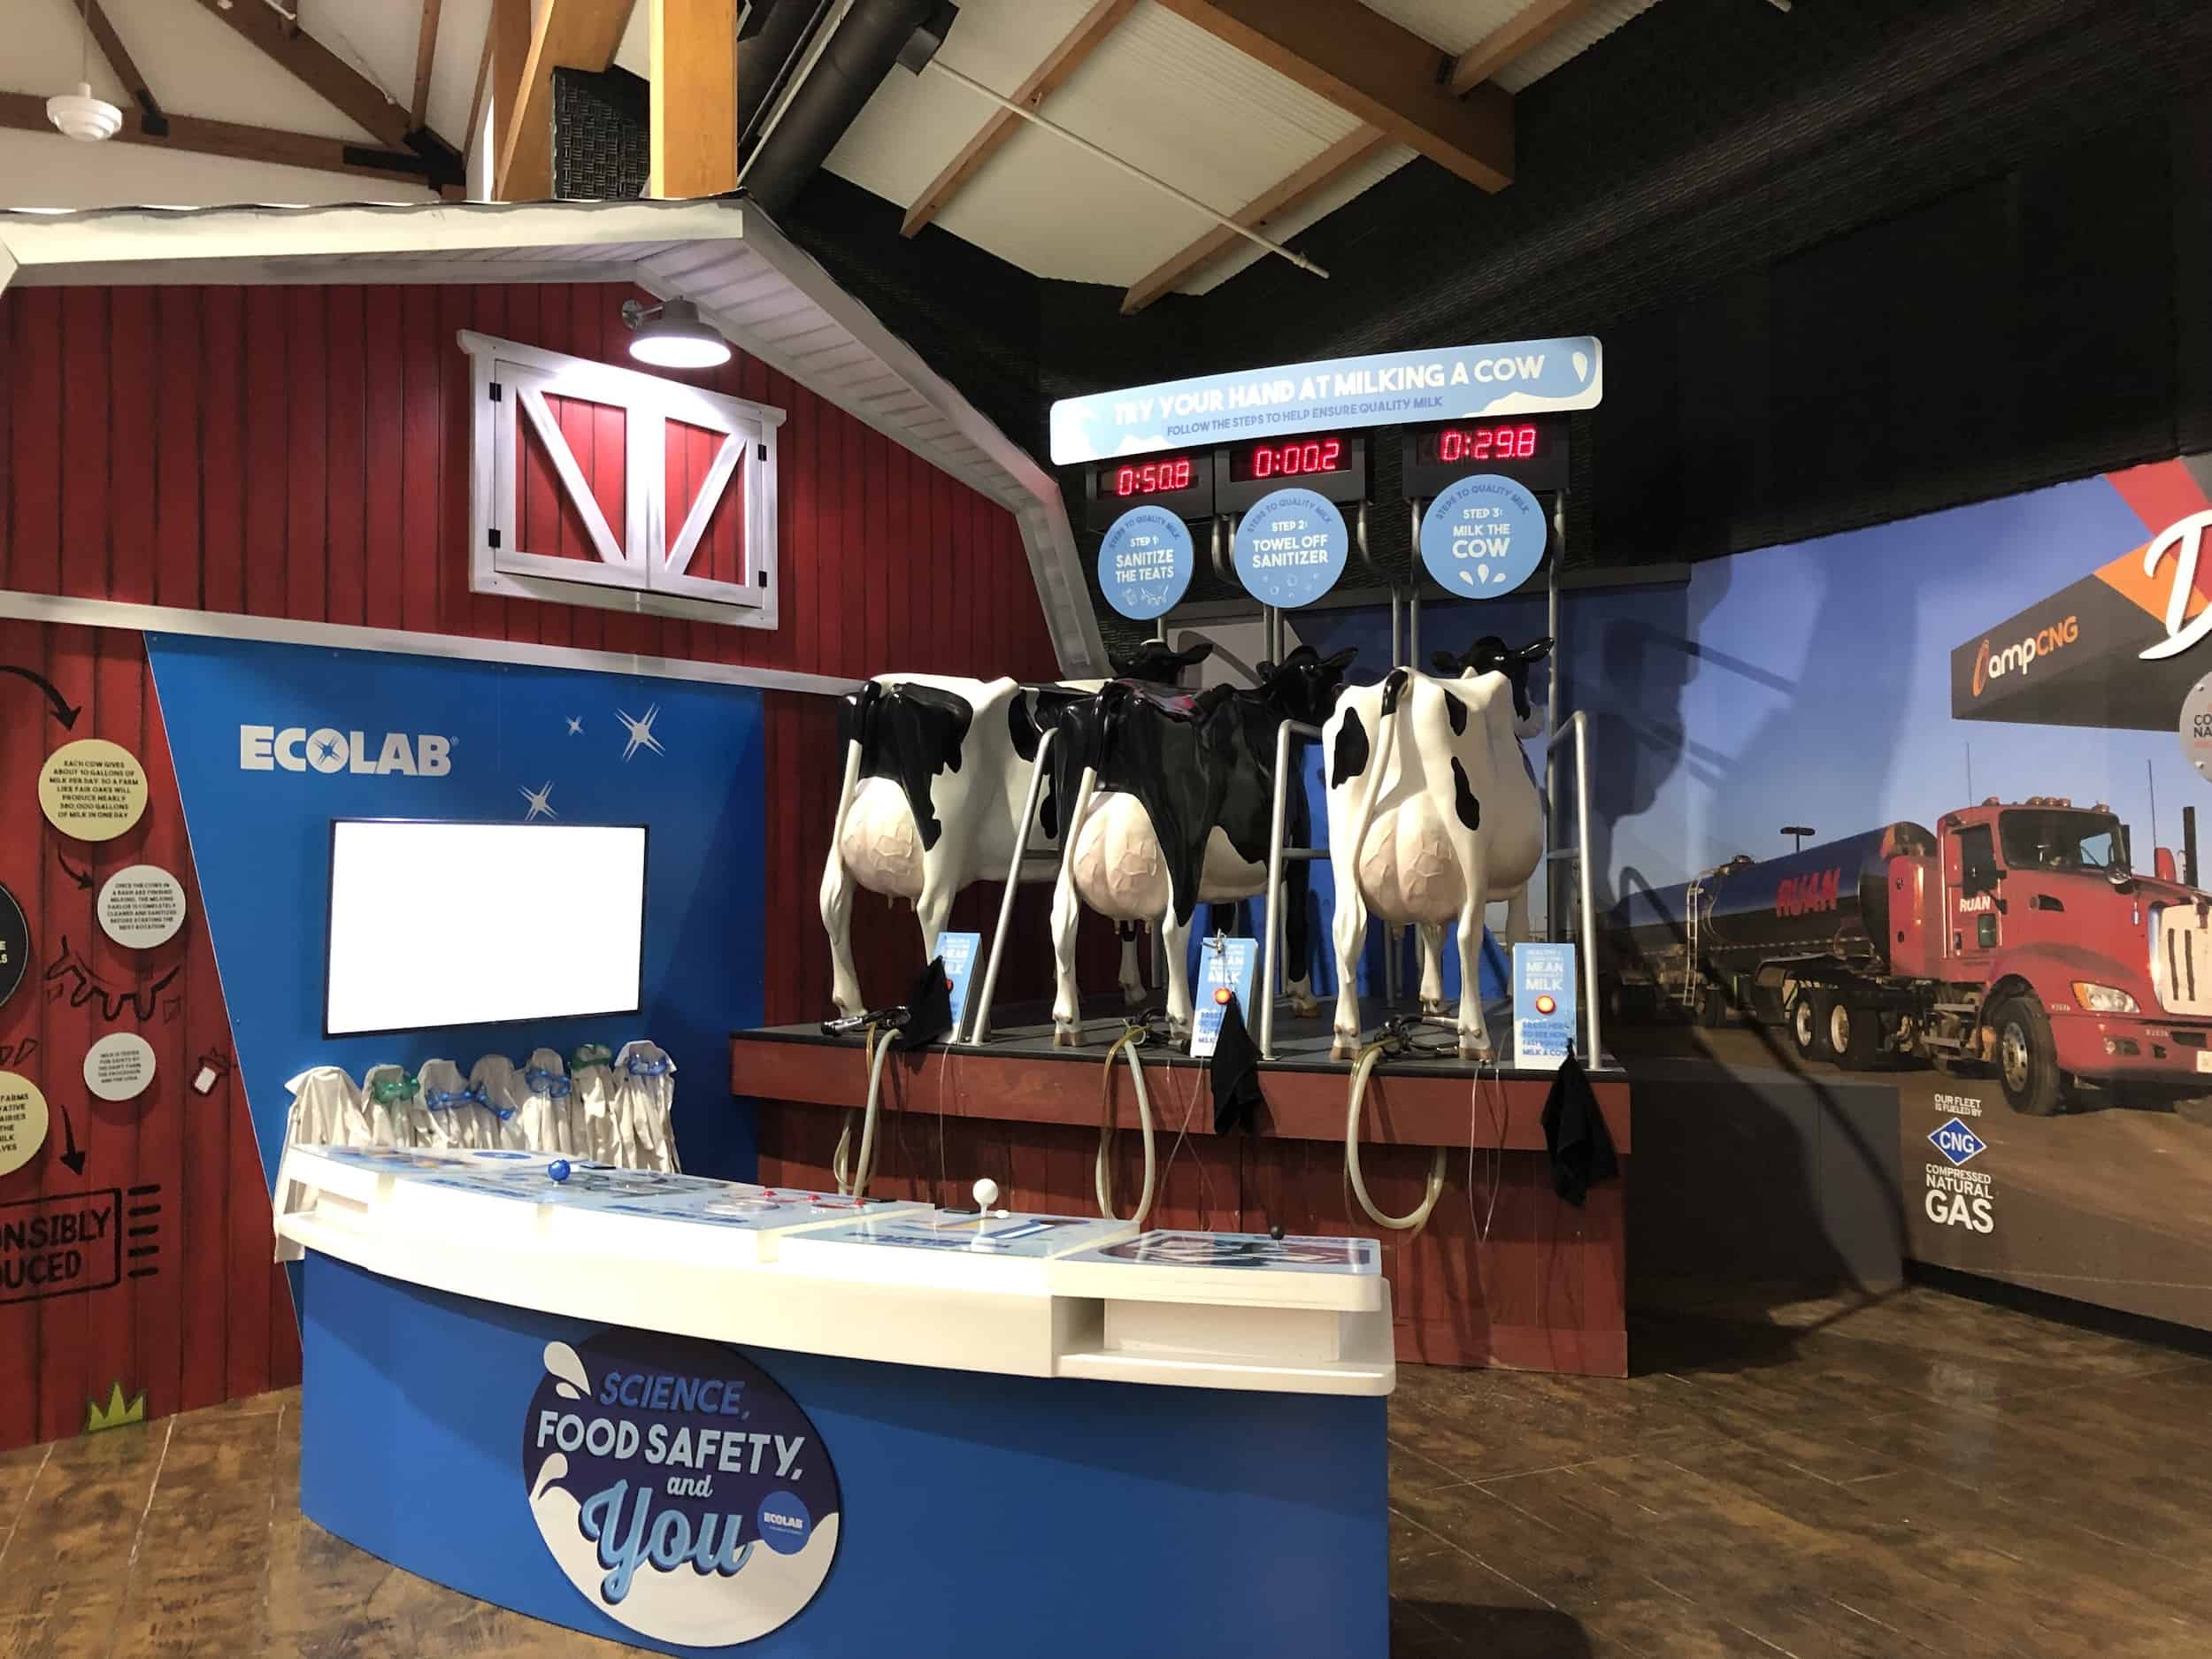 Milking station in the Dairy Adventure building